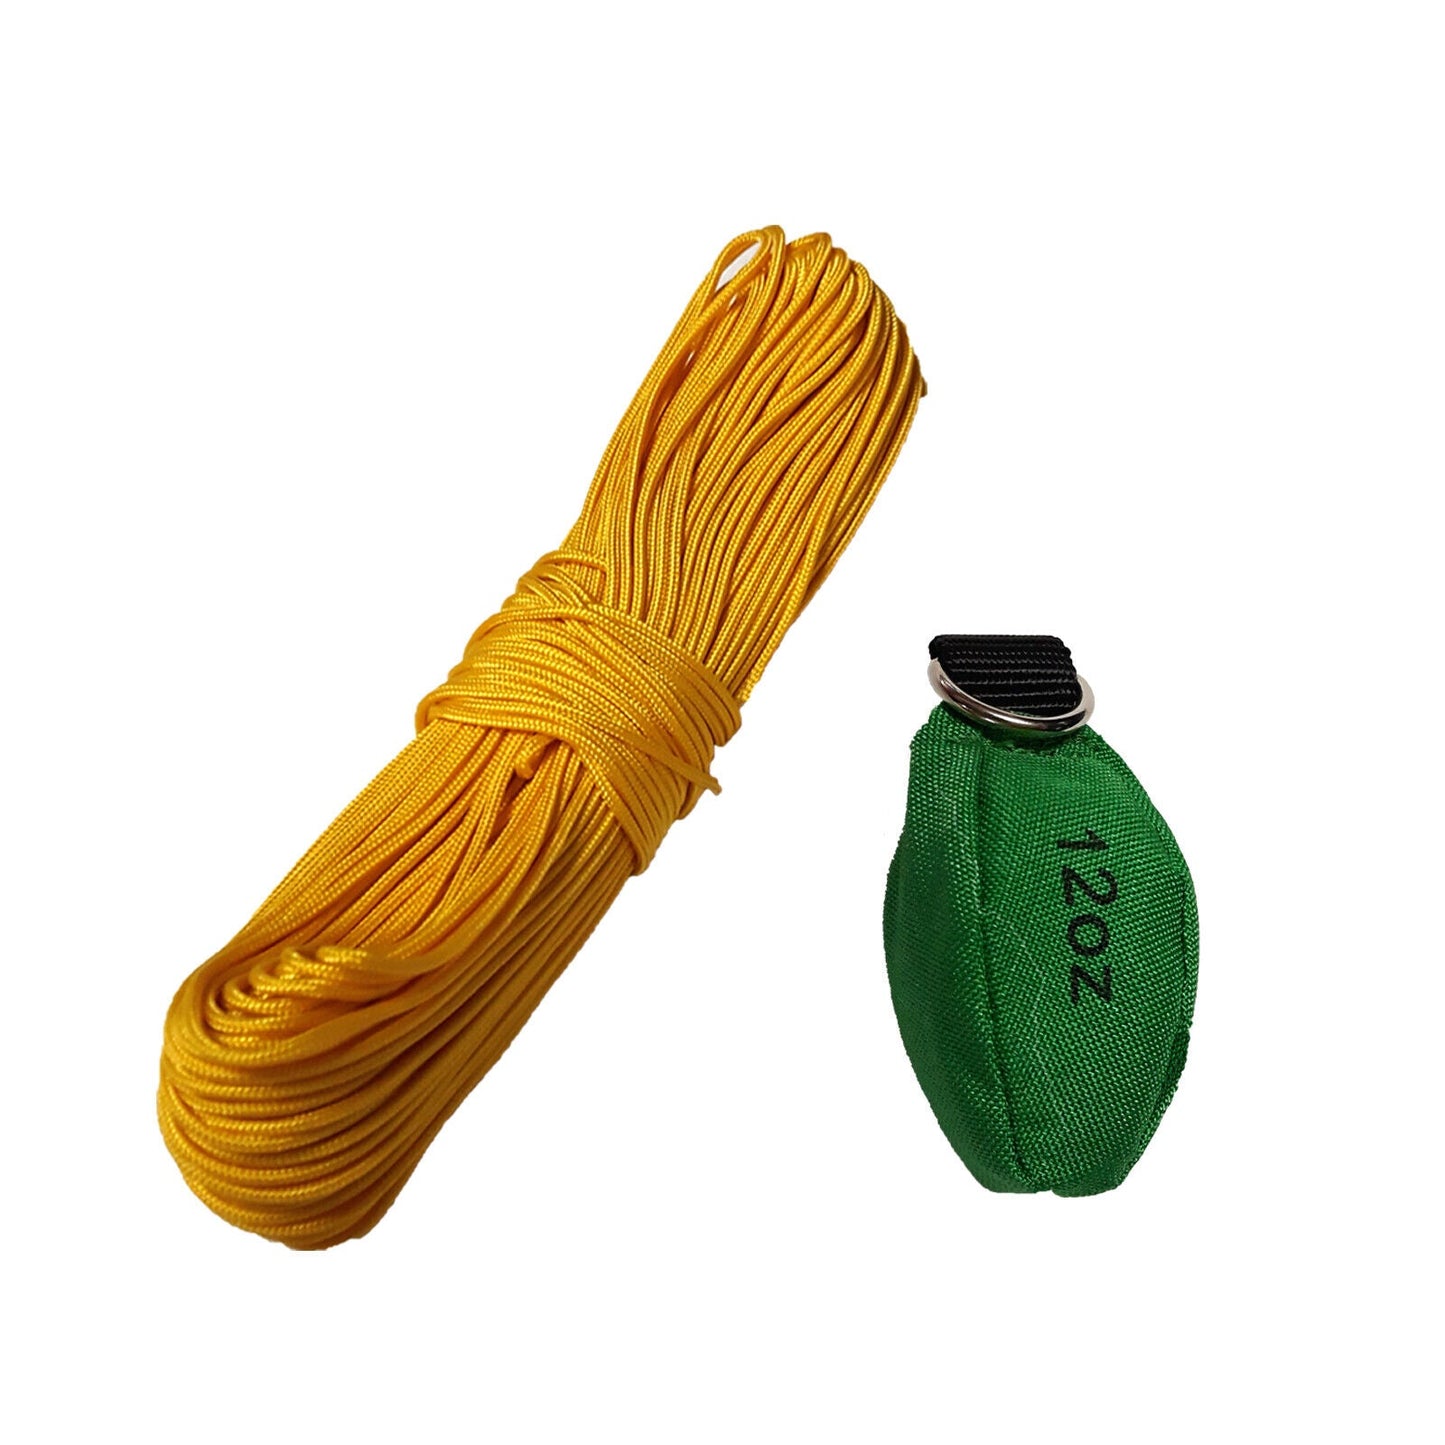 Proven Part Arborist Tree 12Oz. Throw Bag Weight With 1/8 Inch By 150 Feet. Yellow Paracord Throw Line Rope